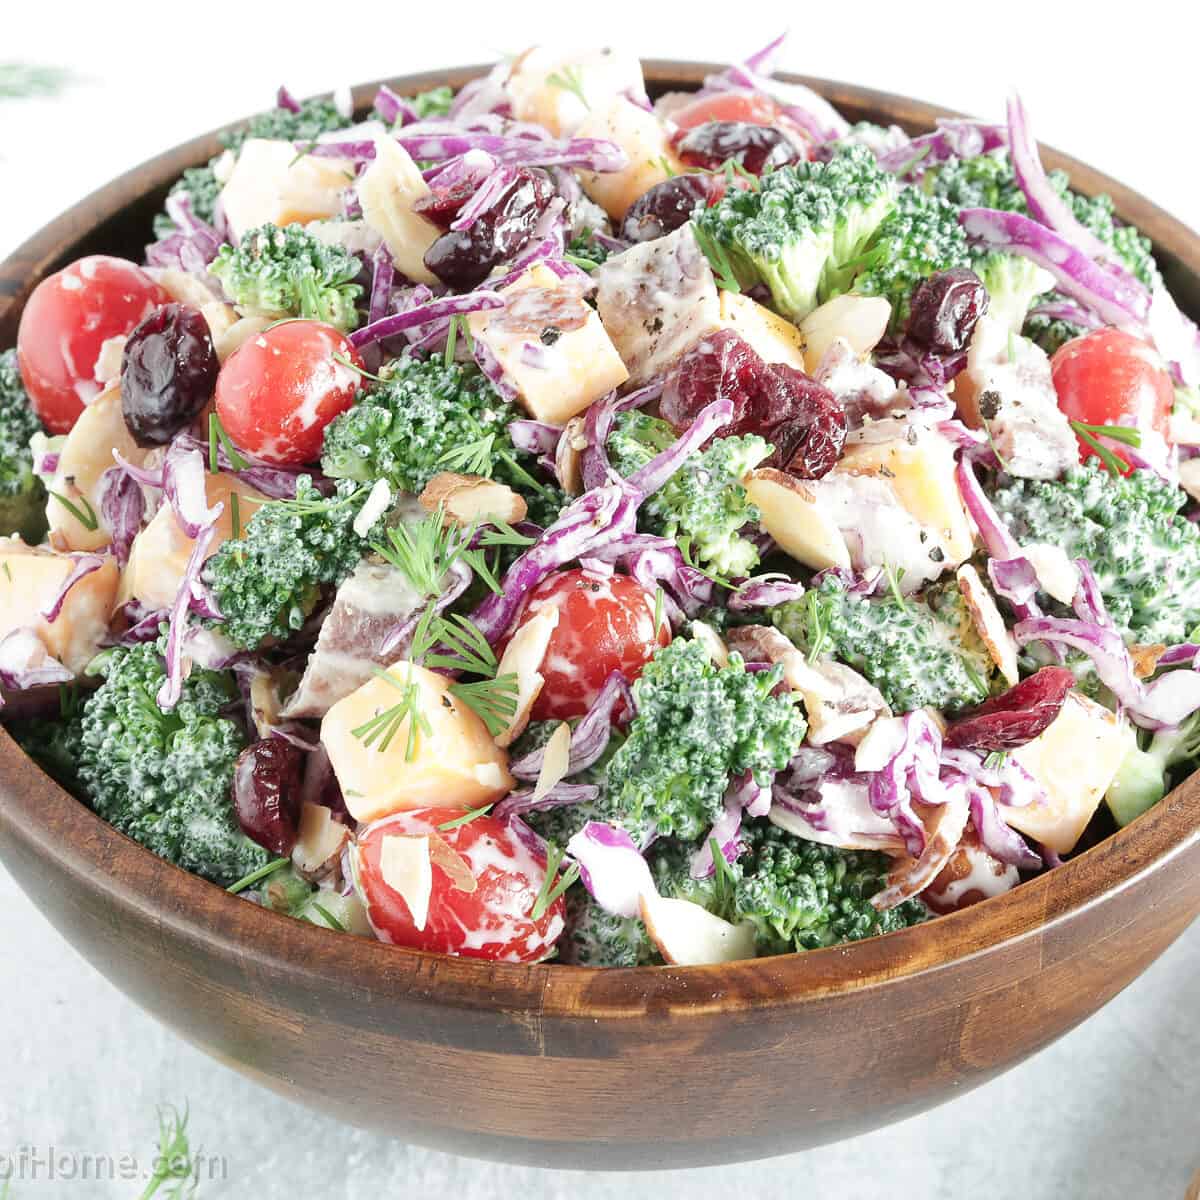 Salads are one of the best go-to dishes for those looking for a nutritious meal. Not only are they usually delicious, but they also provide us with essential vitamins and minerals.